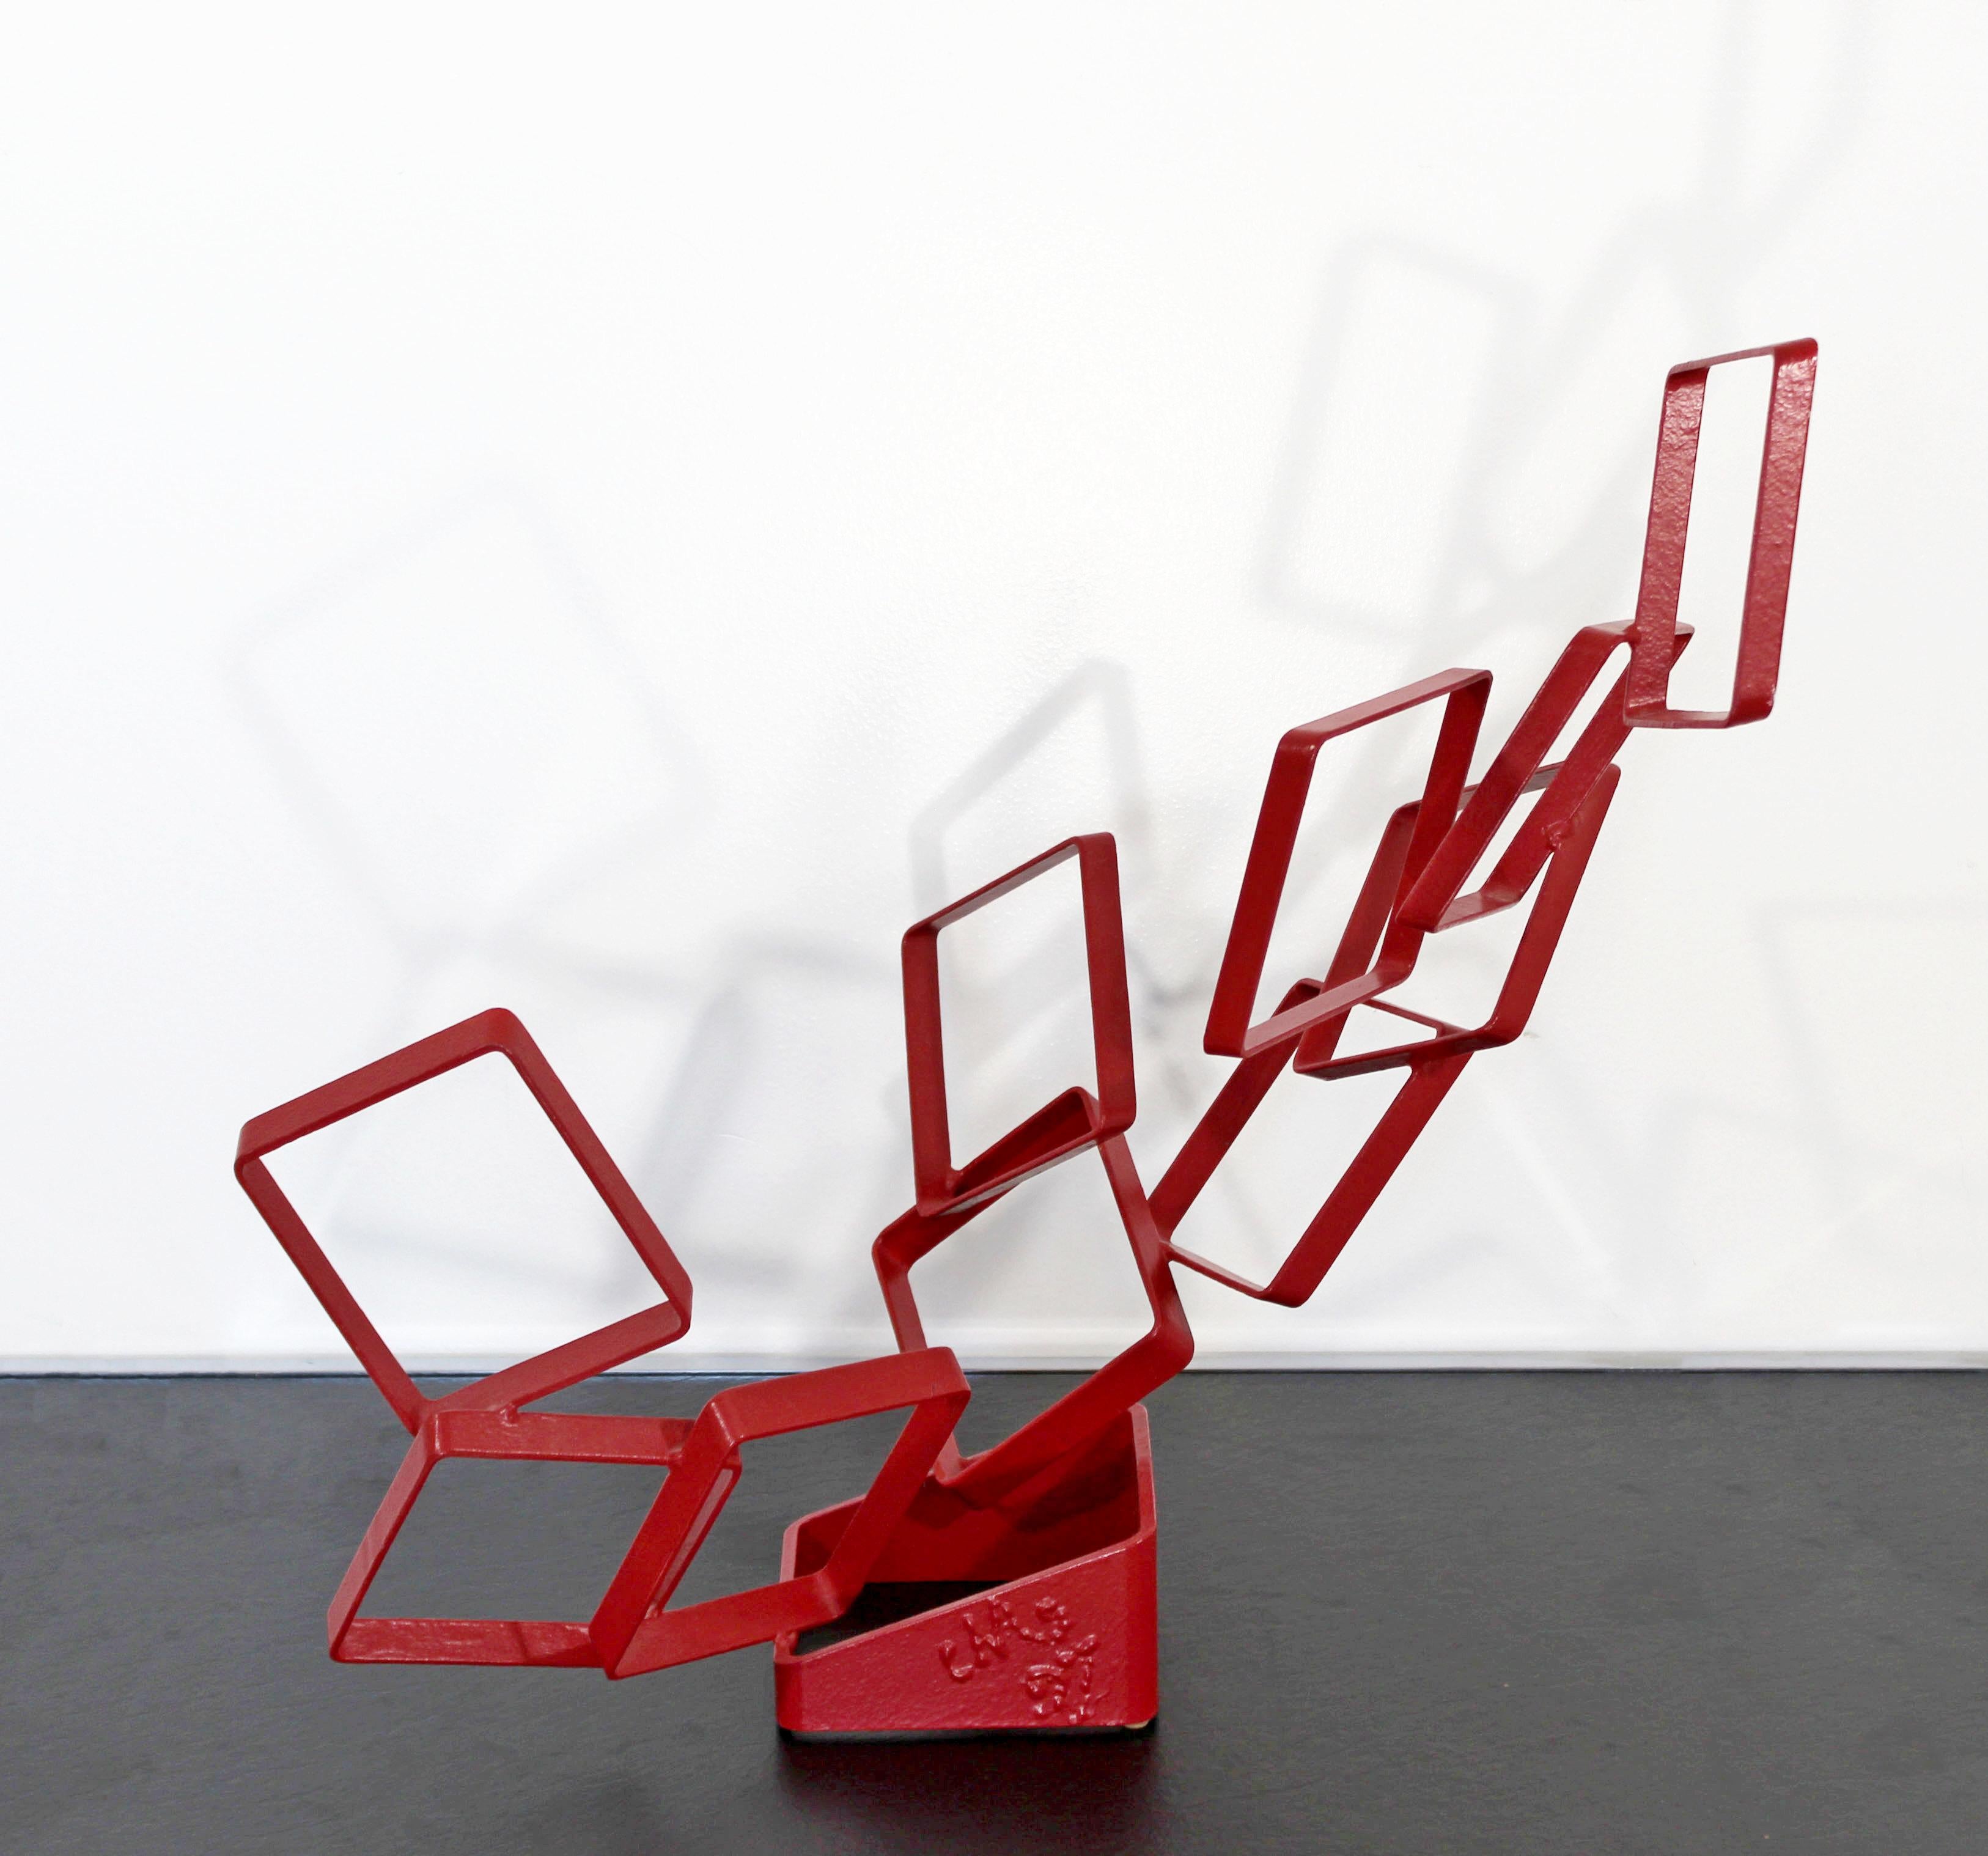 For your consideration is an abstract, red painted metal table sculpture, signed and dated by Cynthia McKean, circa 1997. In excellent condition. The dimensions are 20